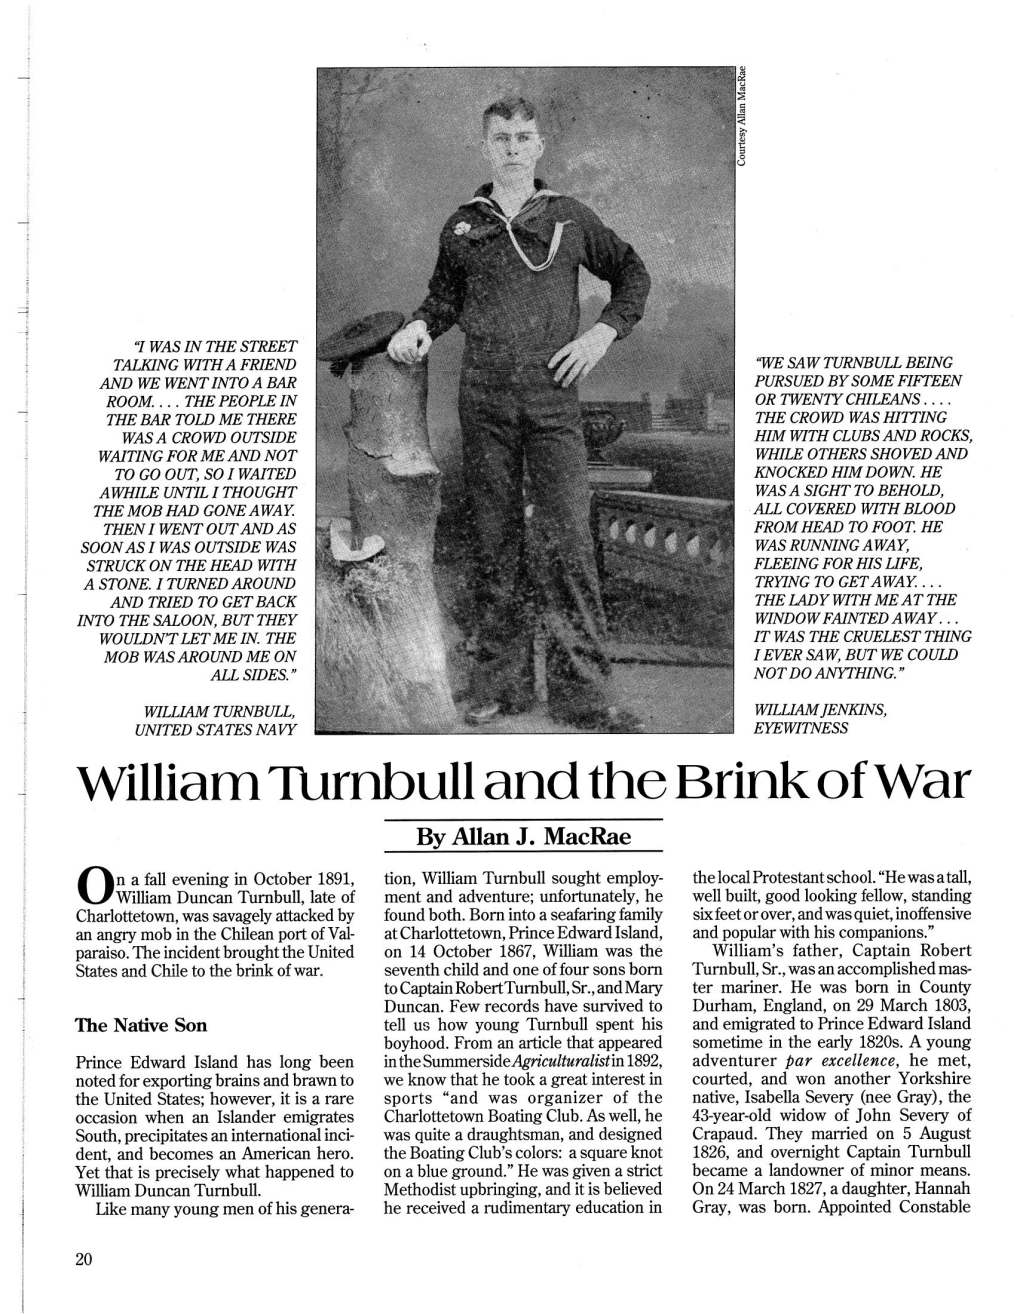 William Turnbull and the Brink of War by Allan J, Macrae